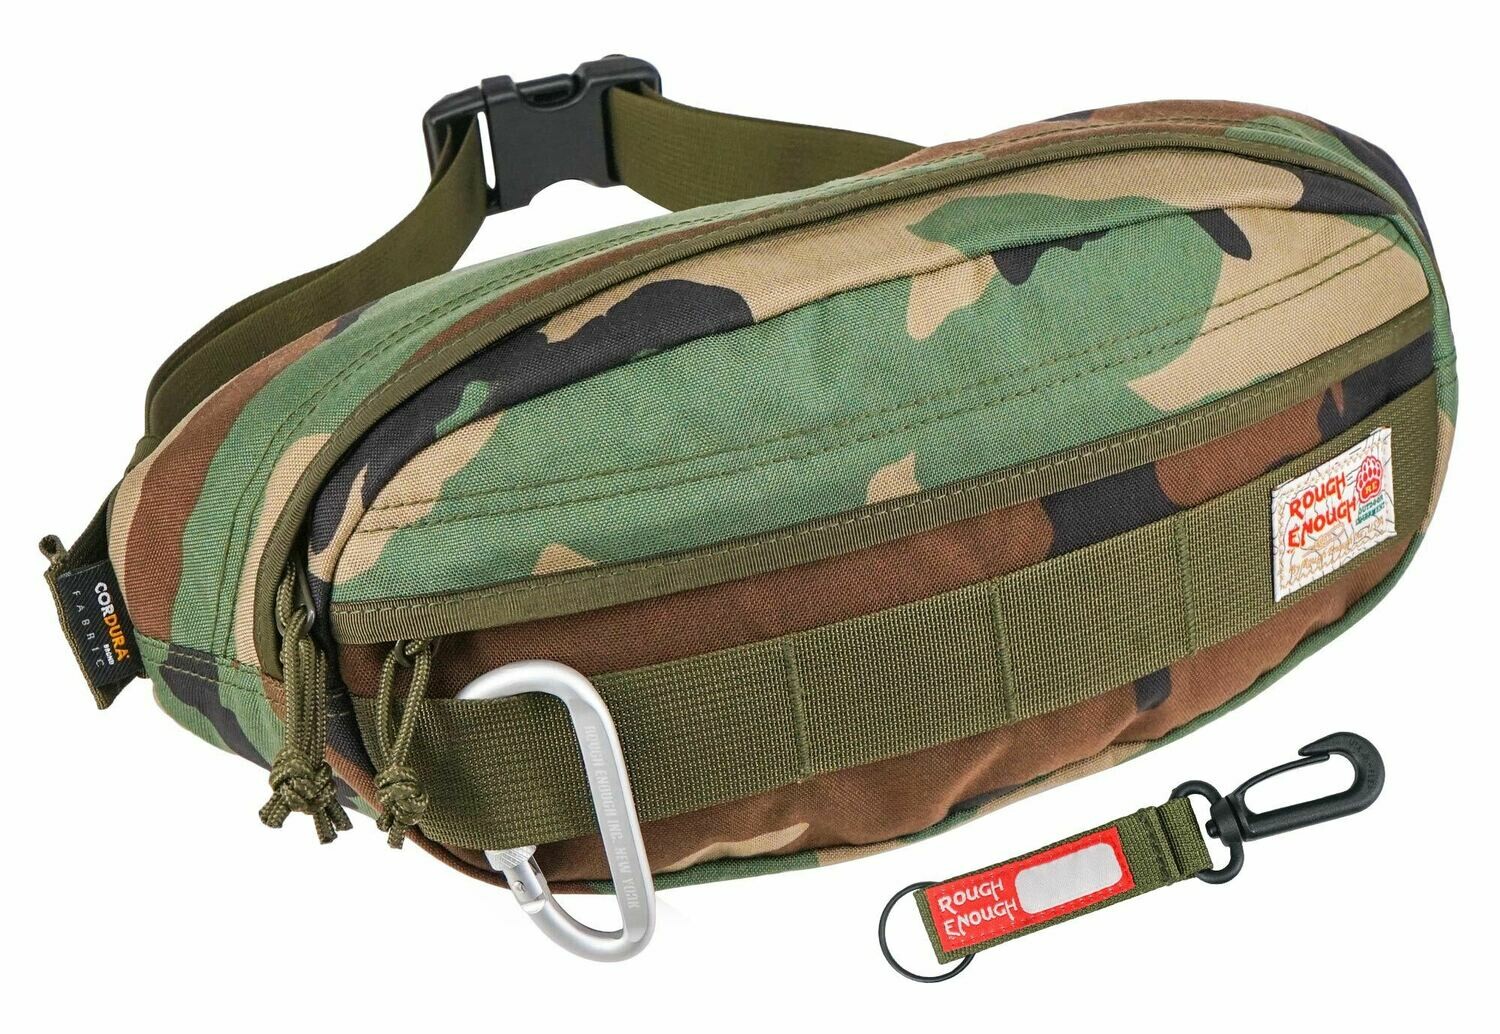 RE8433 Tactical Camo Fanny Pack Hunting Waist Pack